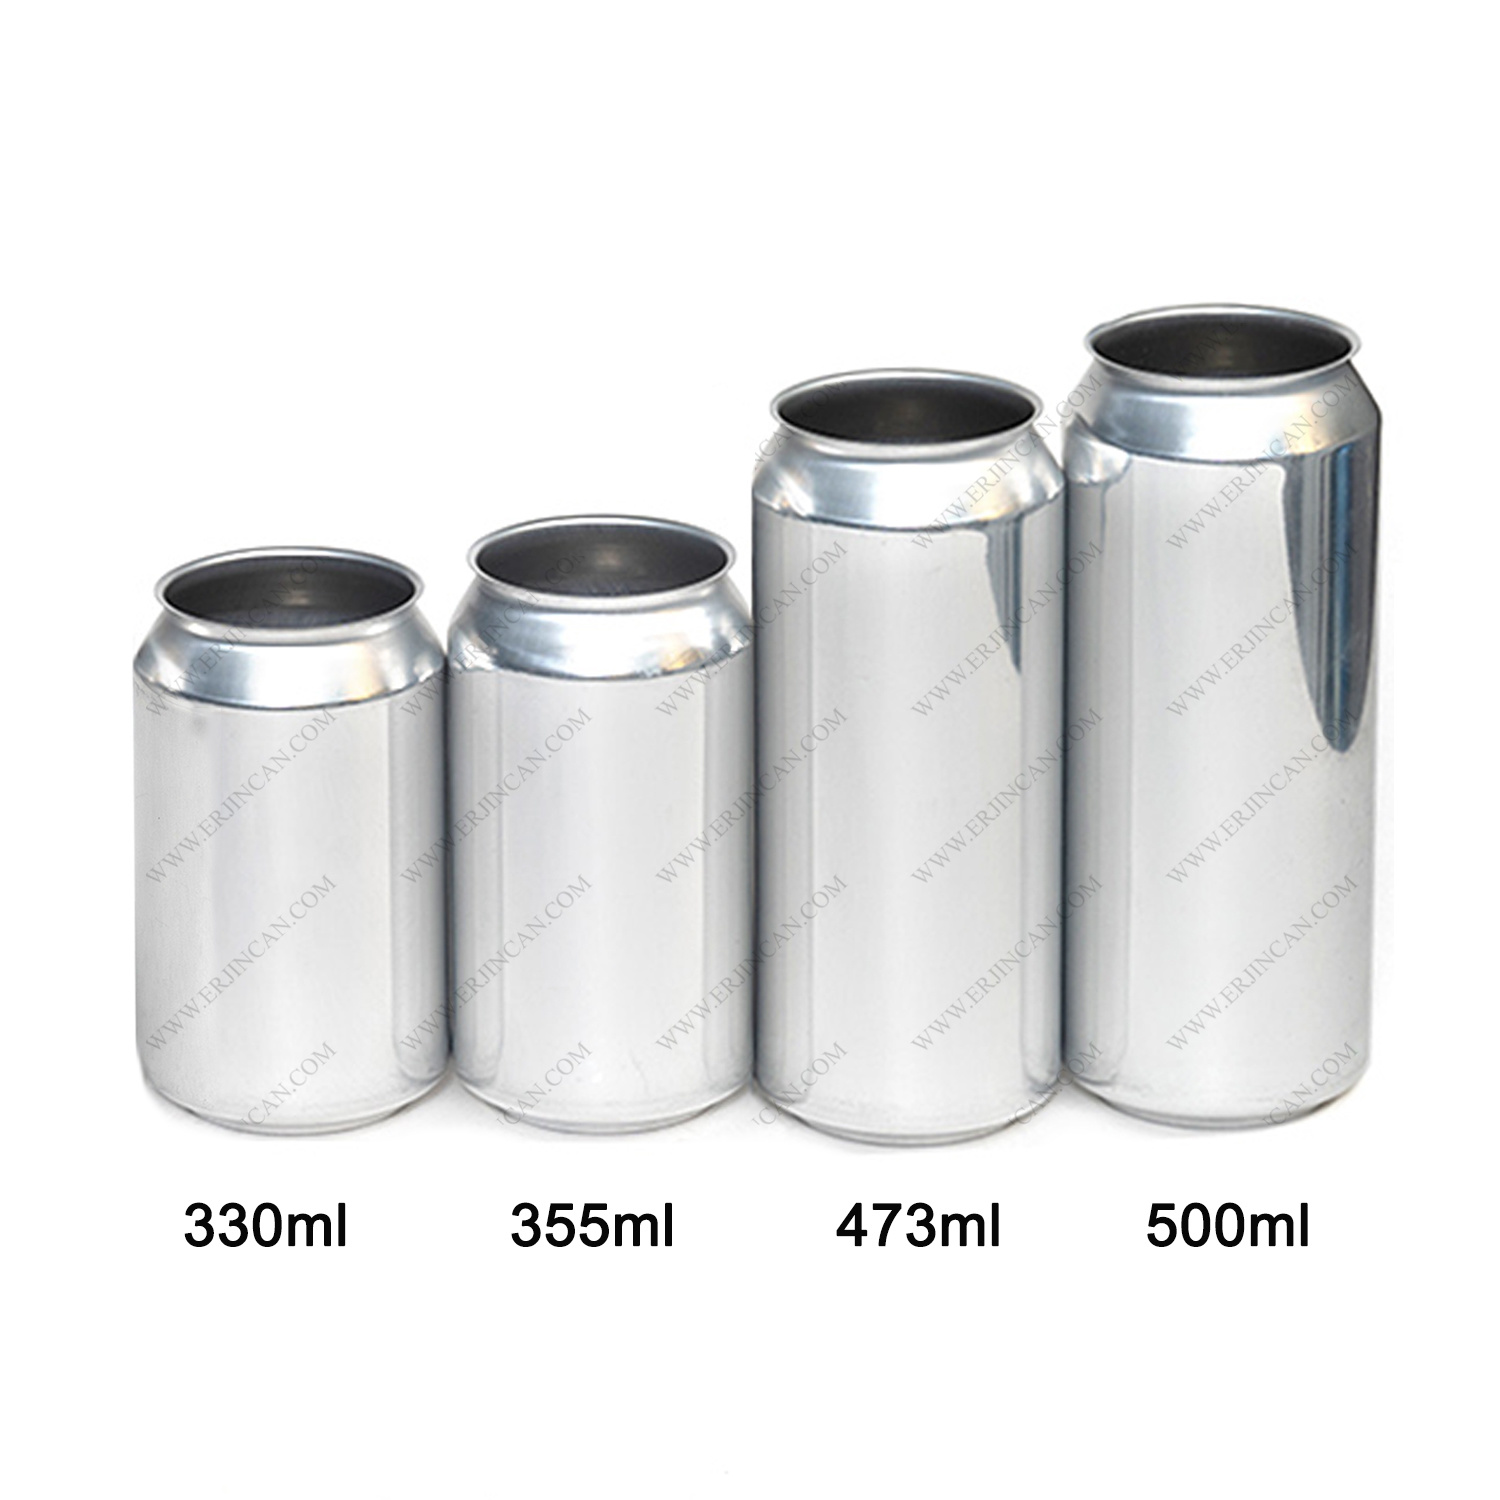 Plain-475ml-Cans-with-Lids-Beer-Cans-Beverage-Cans